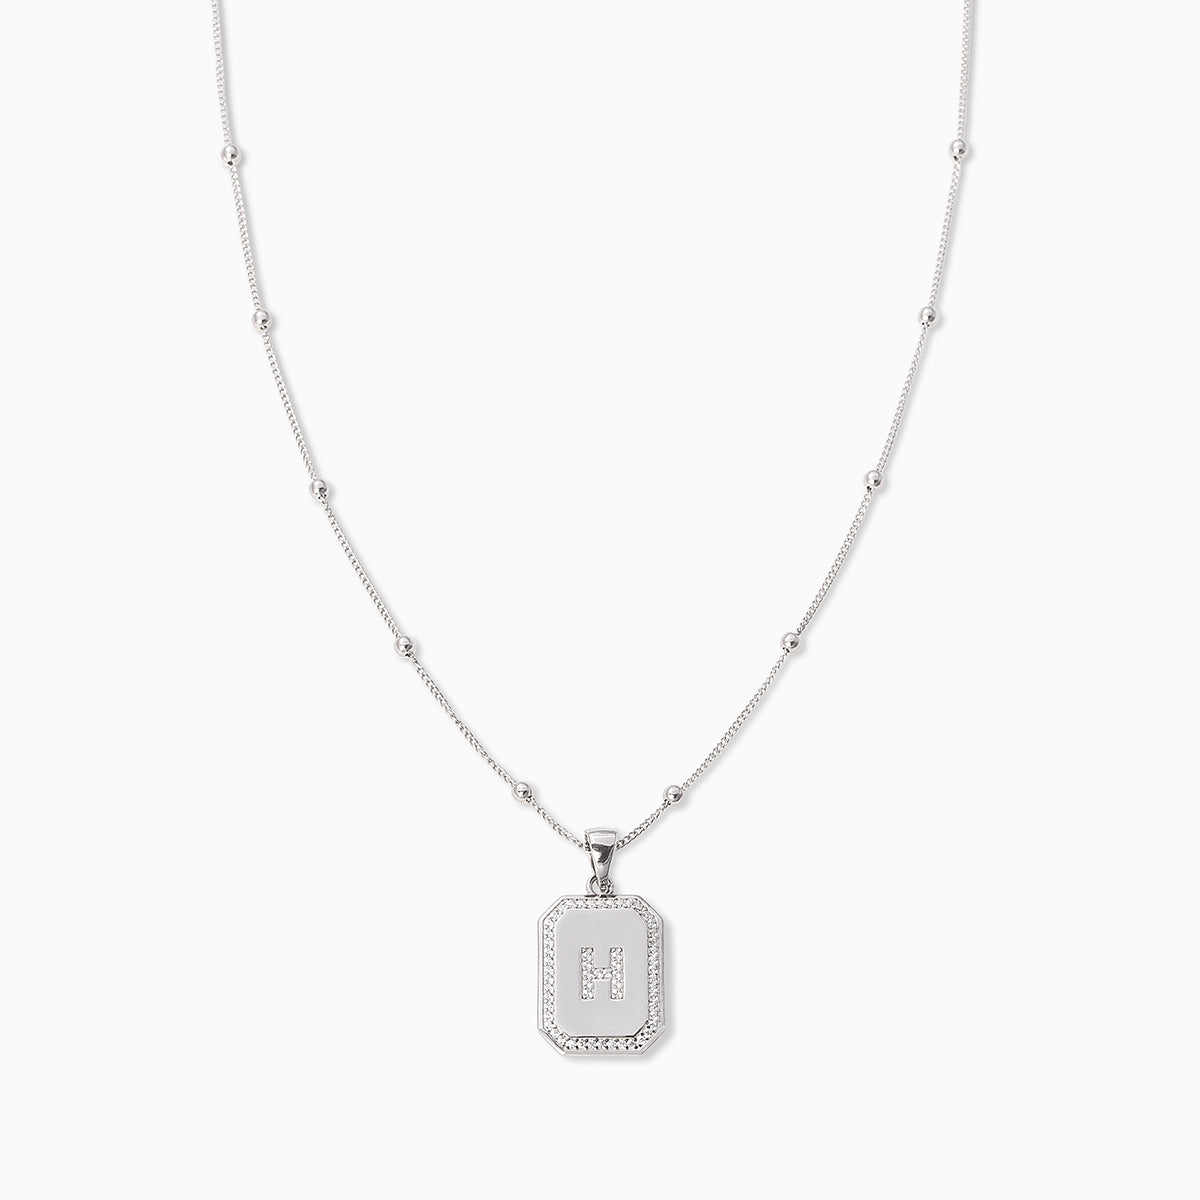 Sur 2.0 Necklace | Sterling Silver H | Product Image | Uncommon James